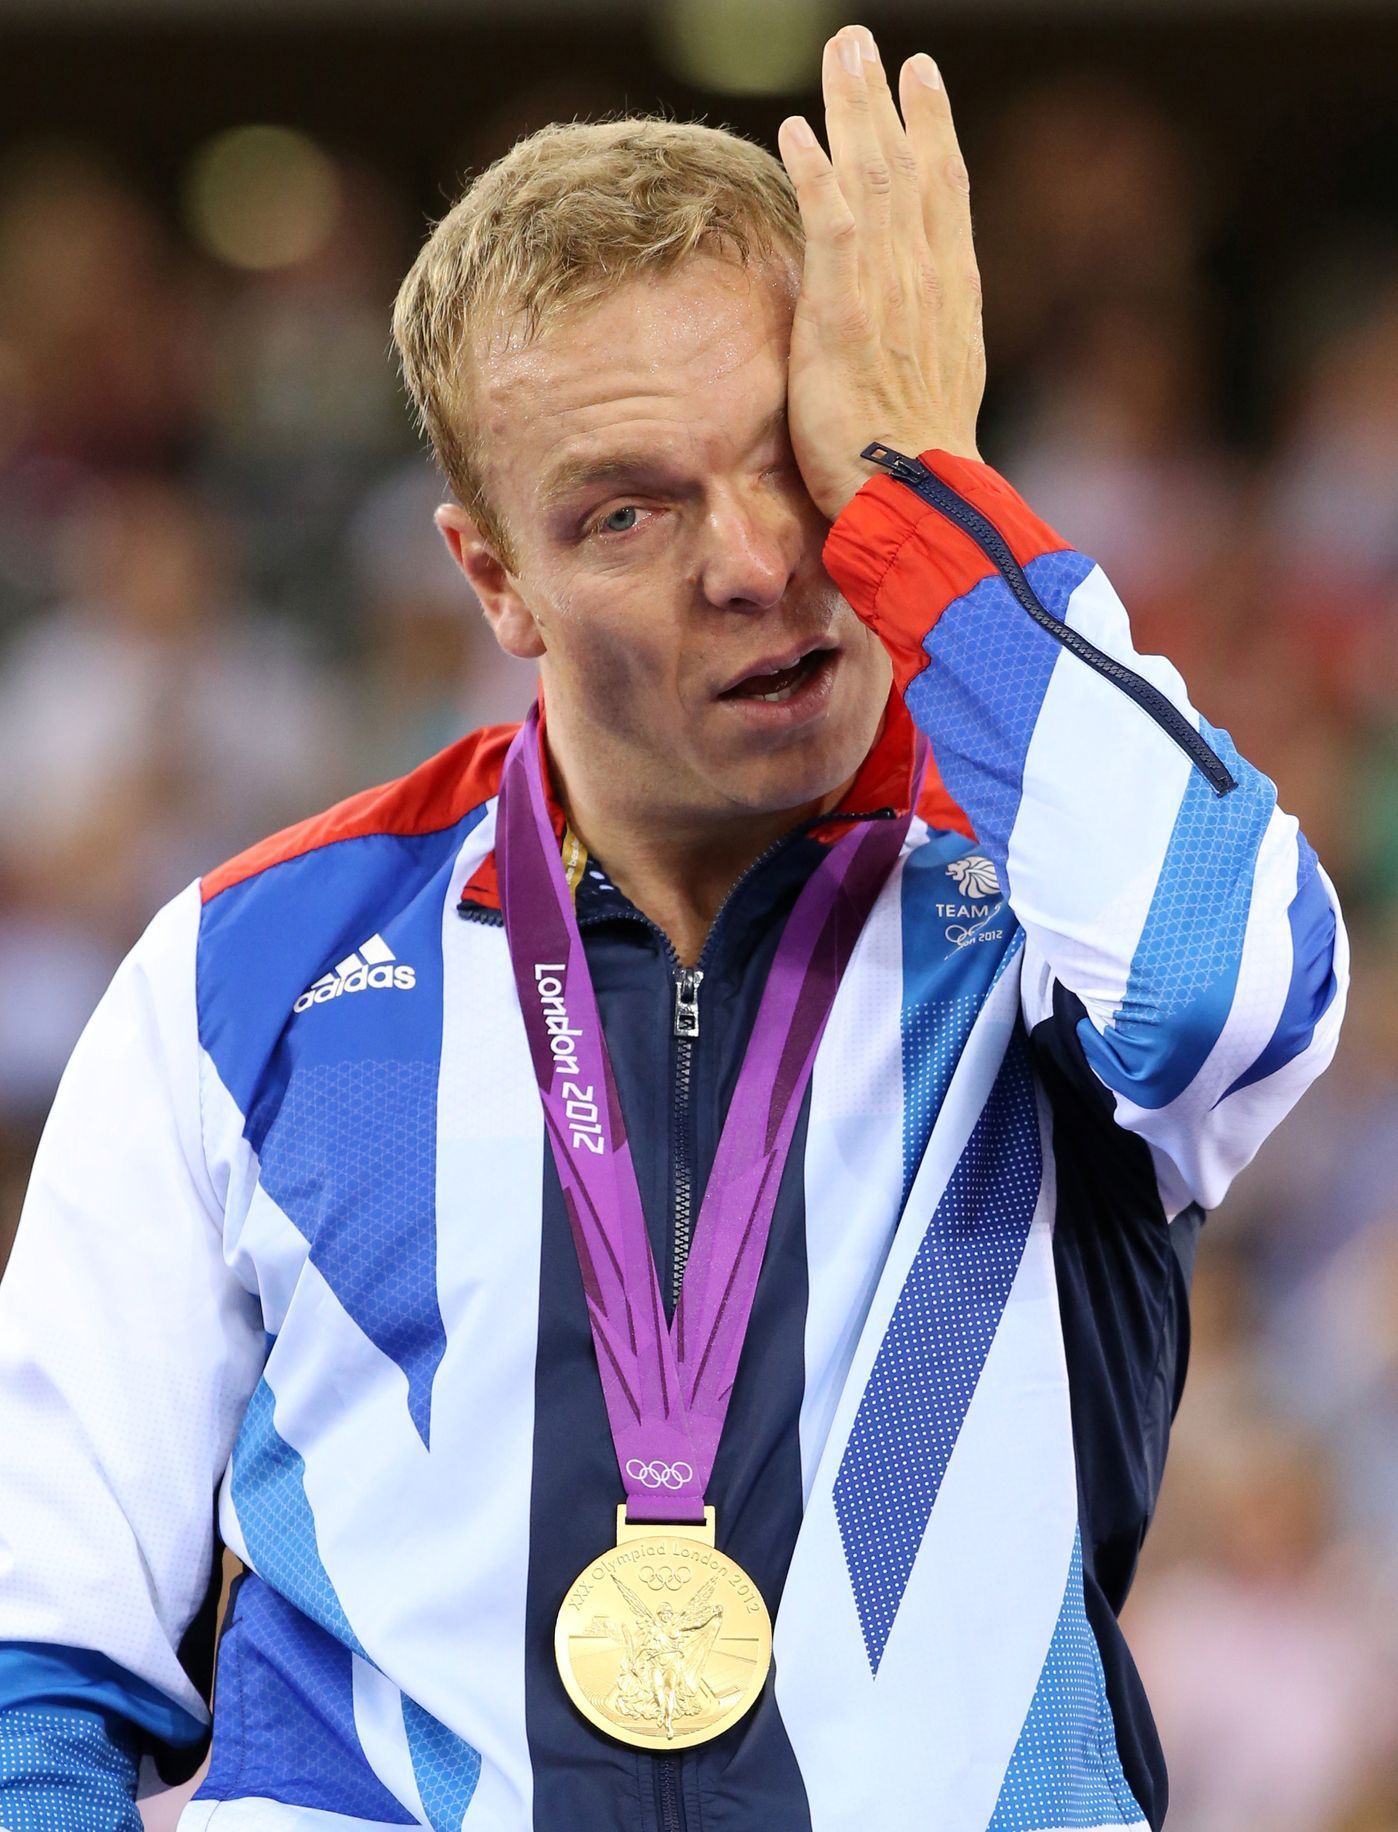 FILE PHOTO: Britain's gold medallist Chris Hoy cries on the podium during the victory ceremony for the track cycling men's keirin event at the Velodrome during the London 2012 Olympic Games